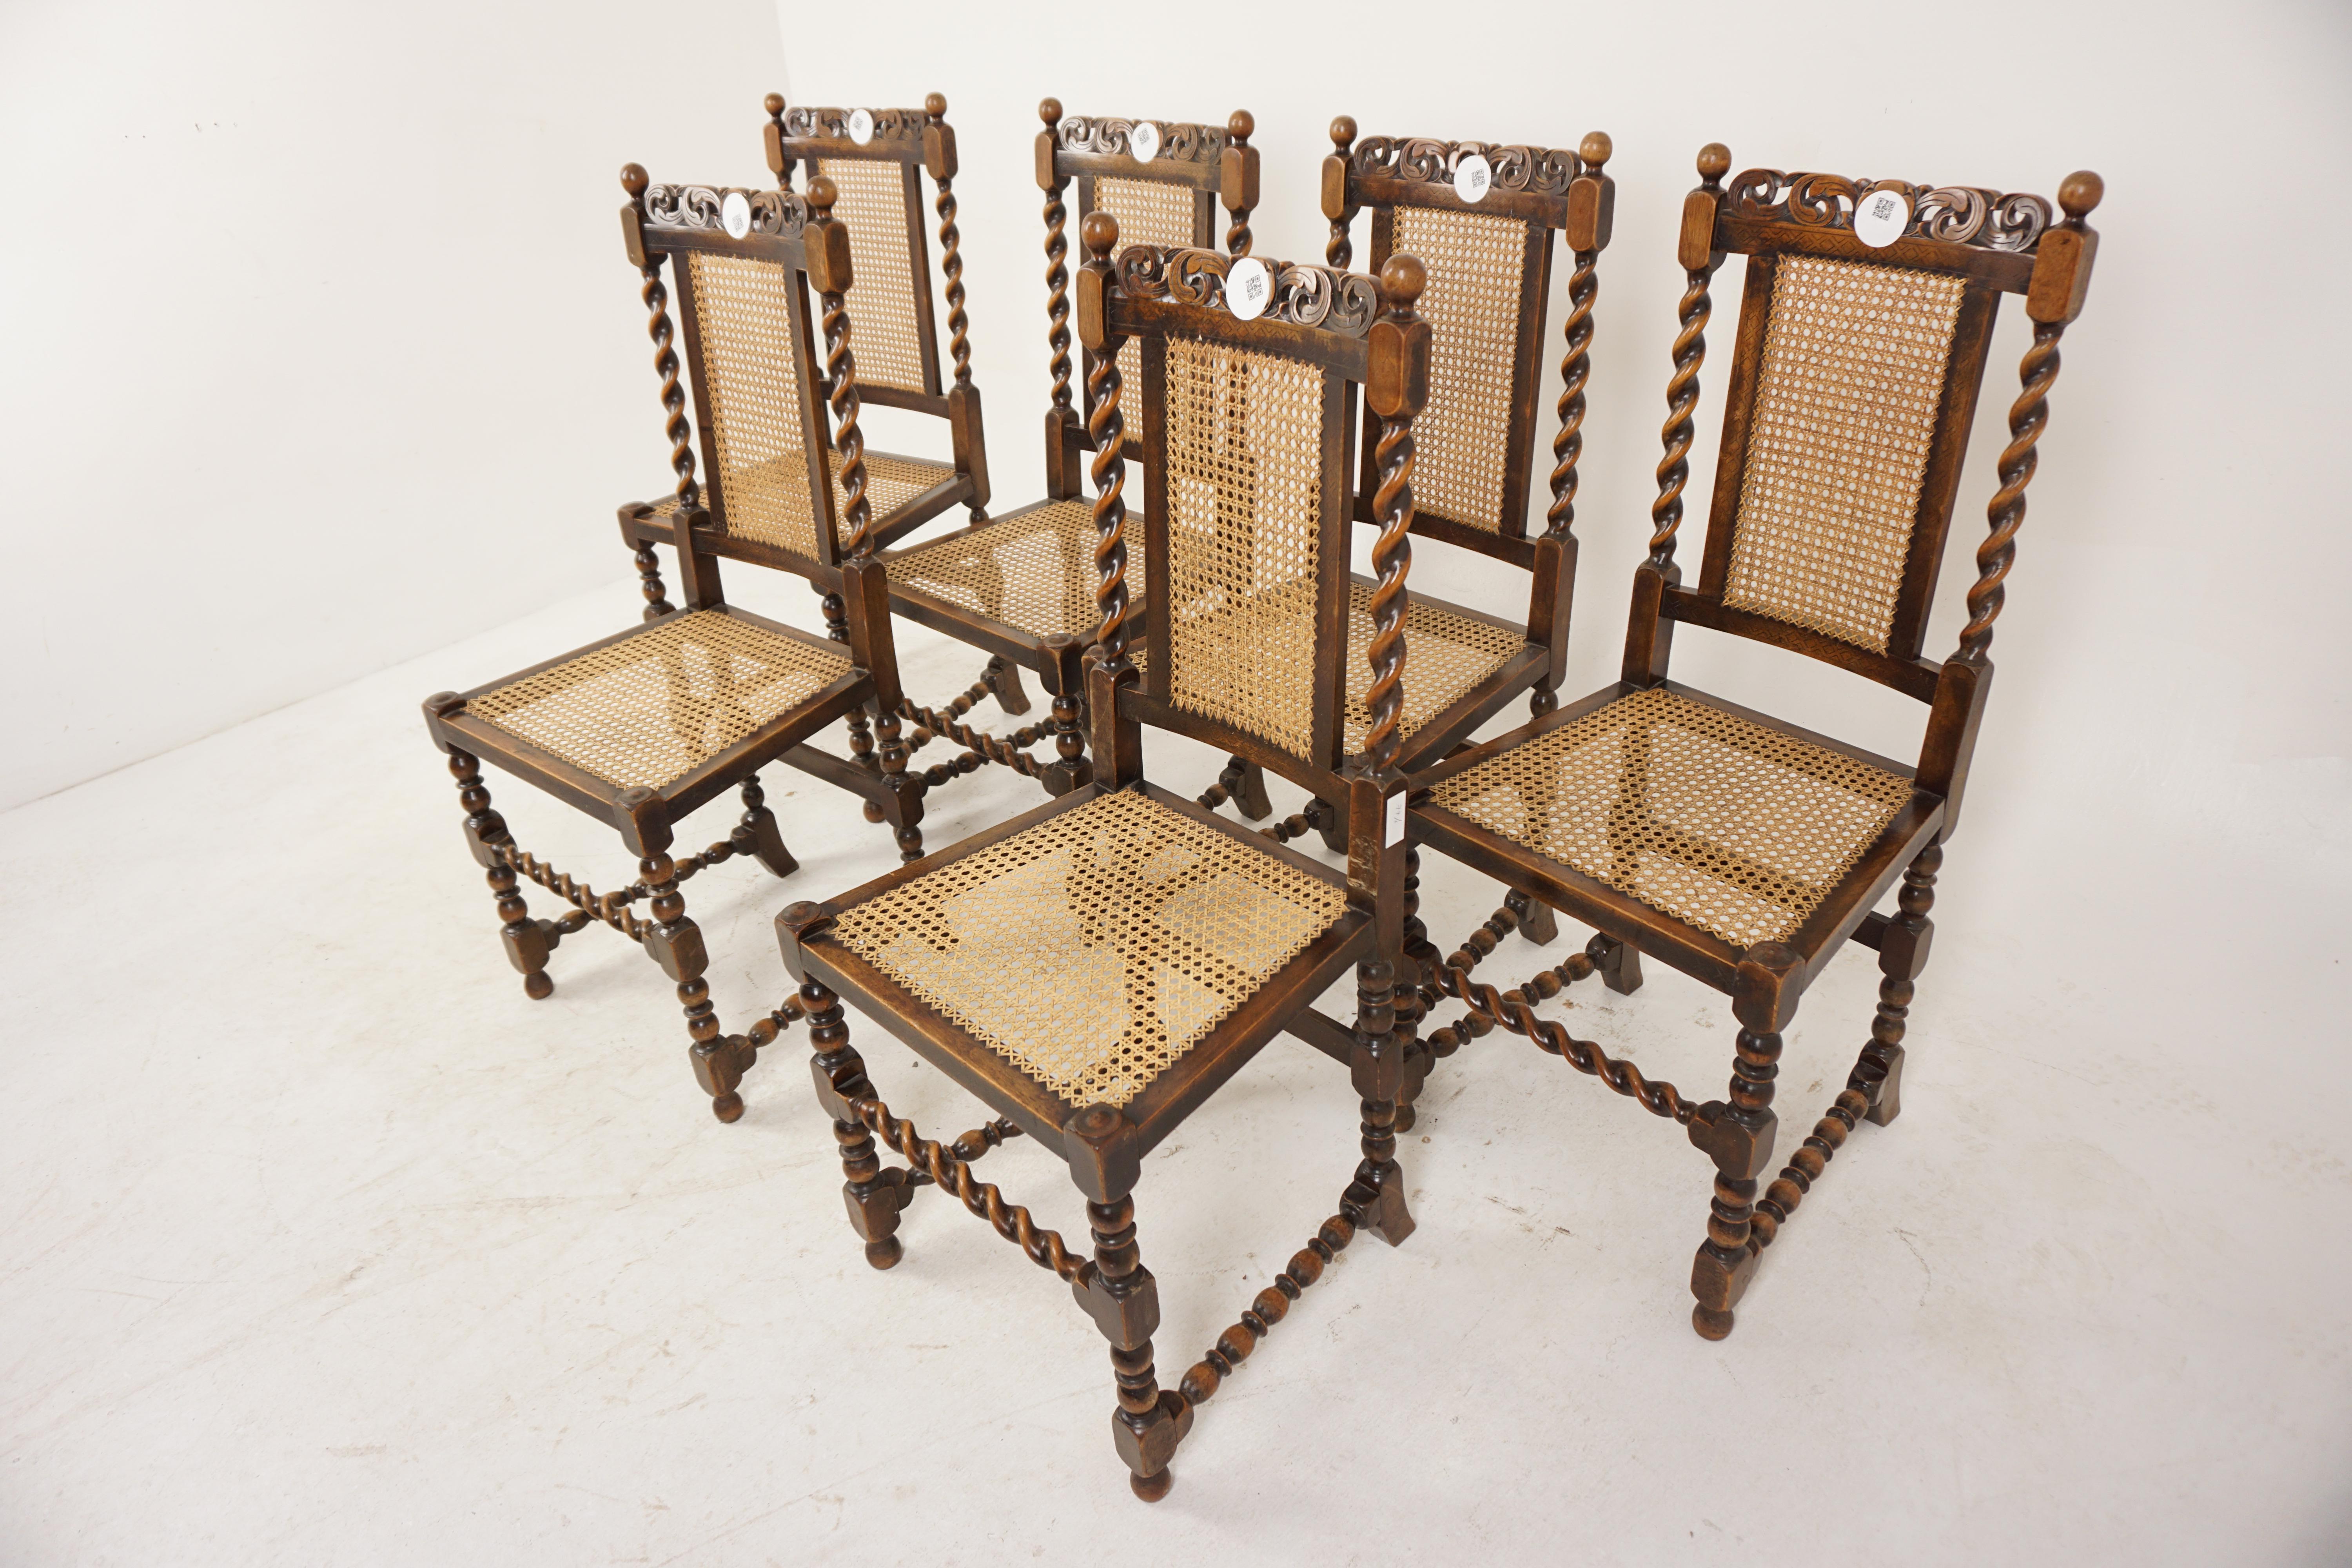 6 Antique Walnut Chairs, Barley Twist Dining Chairs, Caned Back and Seat, Antique Furniture, Scotland 1910, H1030

Scotland 1910
Solid Walnut
Original Finish
Carved rail on top
Pair of barley twist supports on the ends
Caned back and